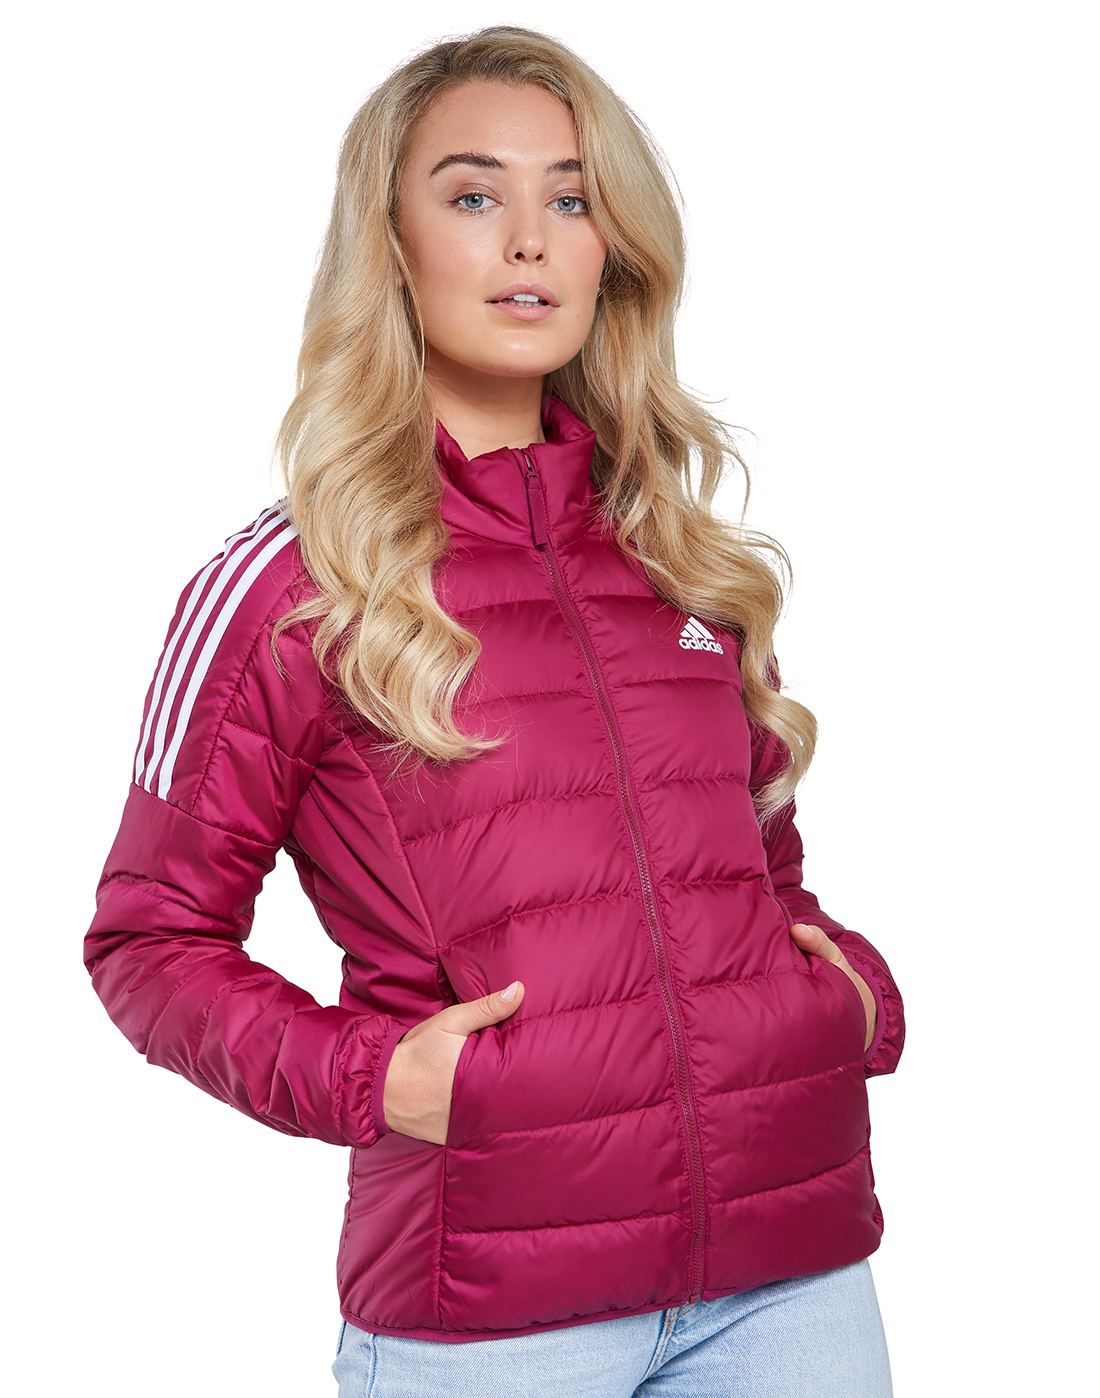 Buy > adidas essential down gilet > in stock